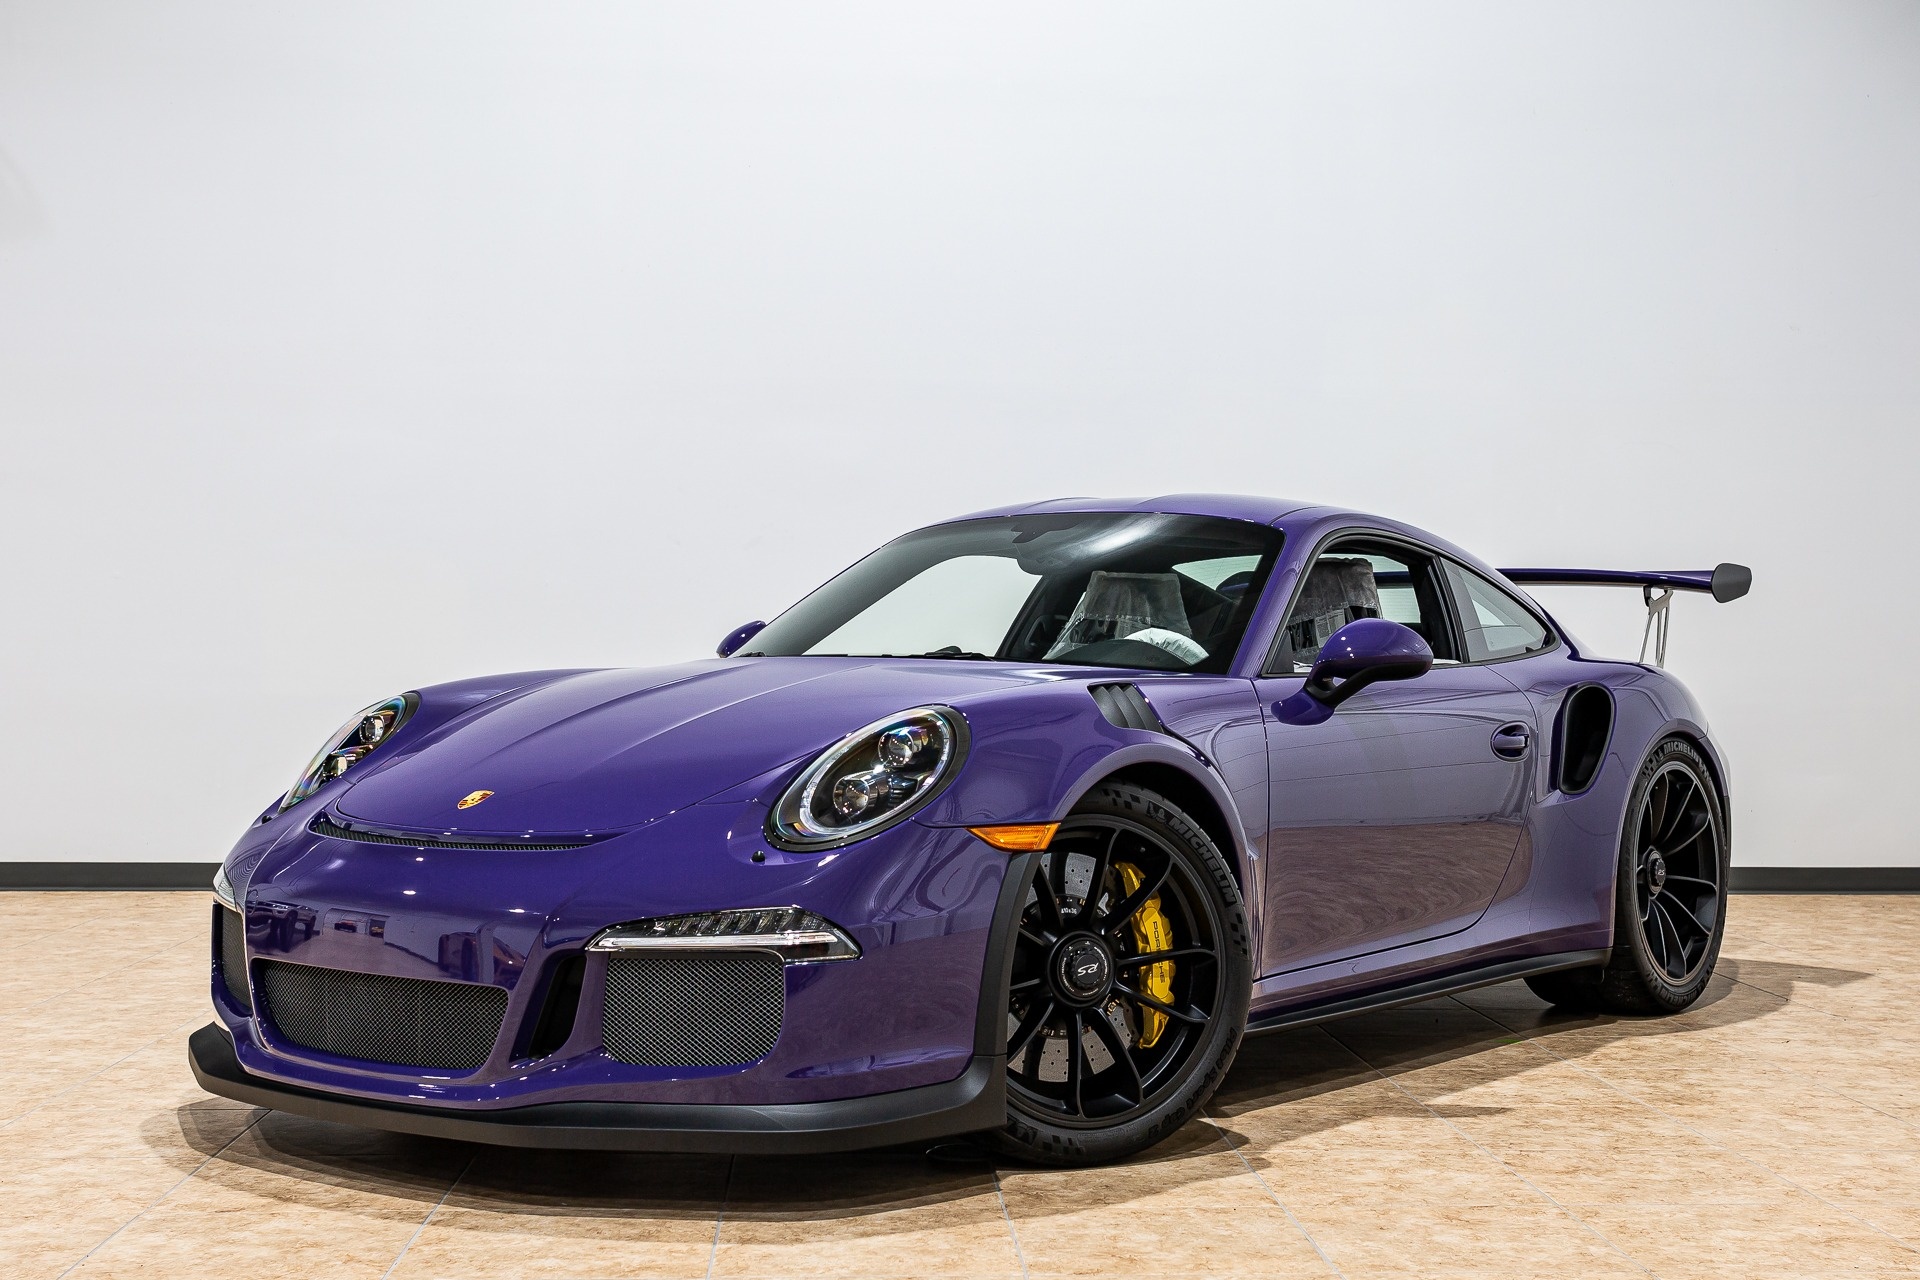 Used 2016 Porsche 911 GT3 RS for sale, Exquisite performance, Luxury sports car, Outstanding quality, 1920x1280 HD Desktop